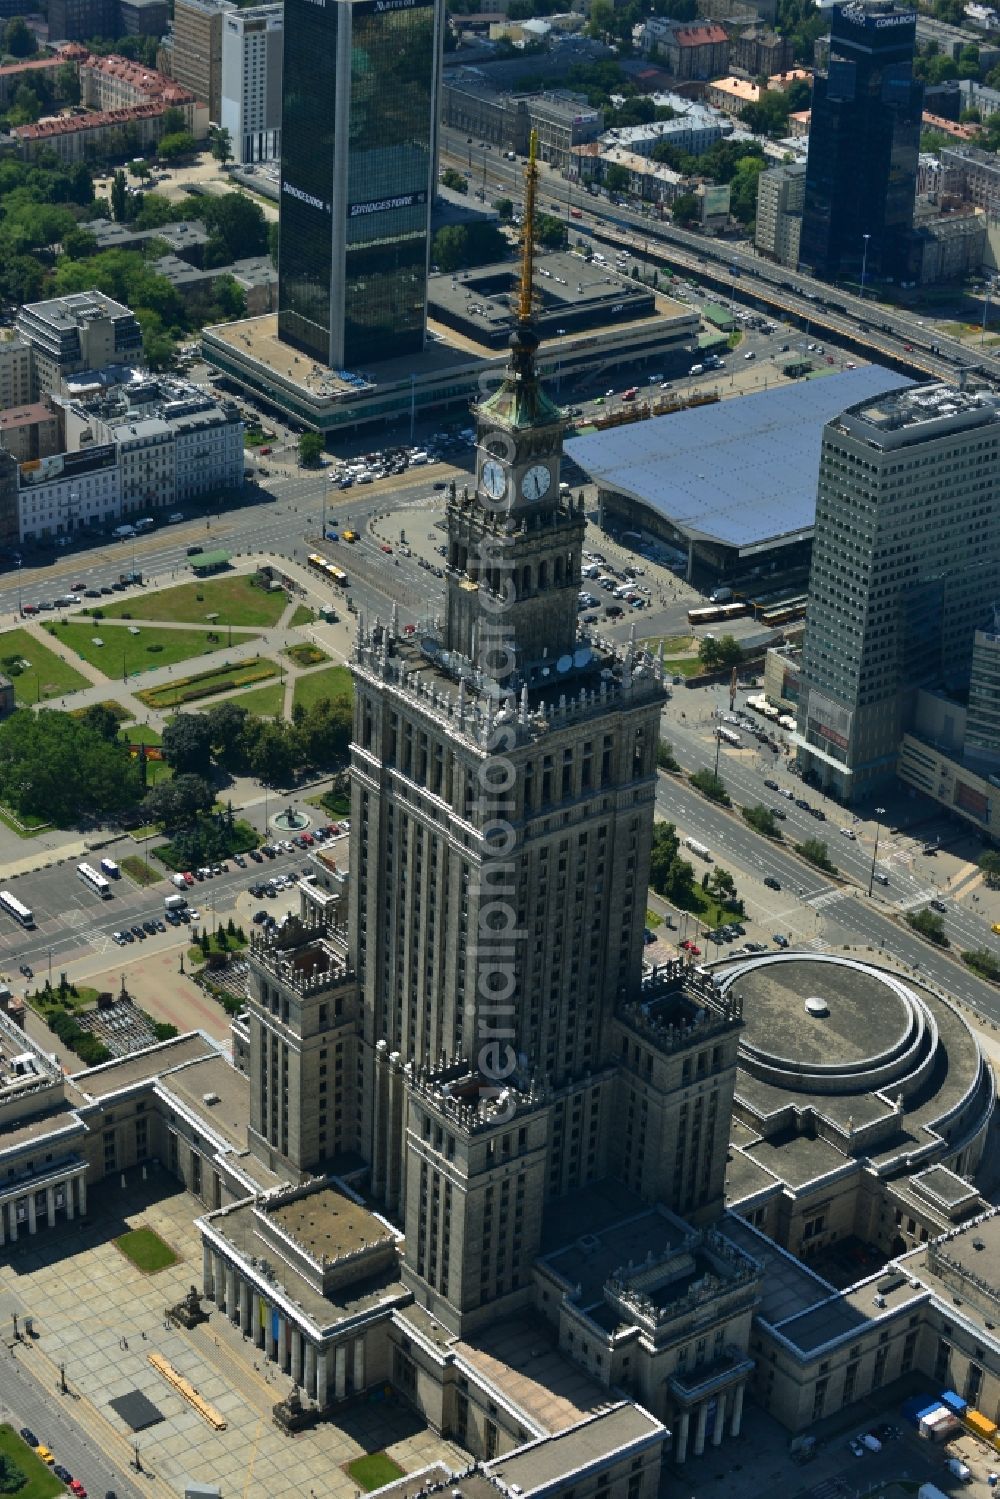 Aerial image Warschau - View on the landmark in the city center, the high-rise building complex of the Palace of Culture and Science (Palac Kultury i Nauki Polish) in Warsaw in Poland